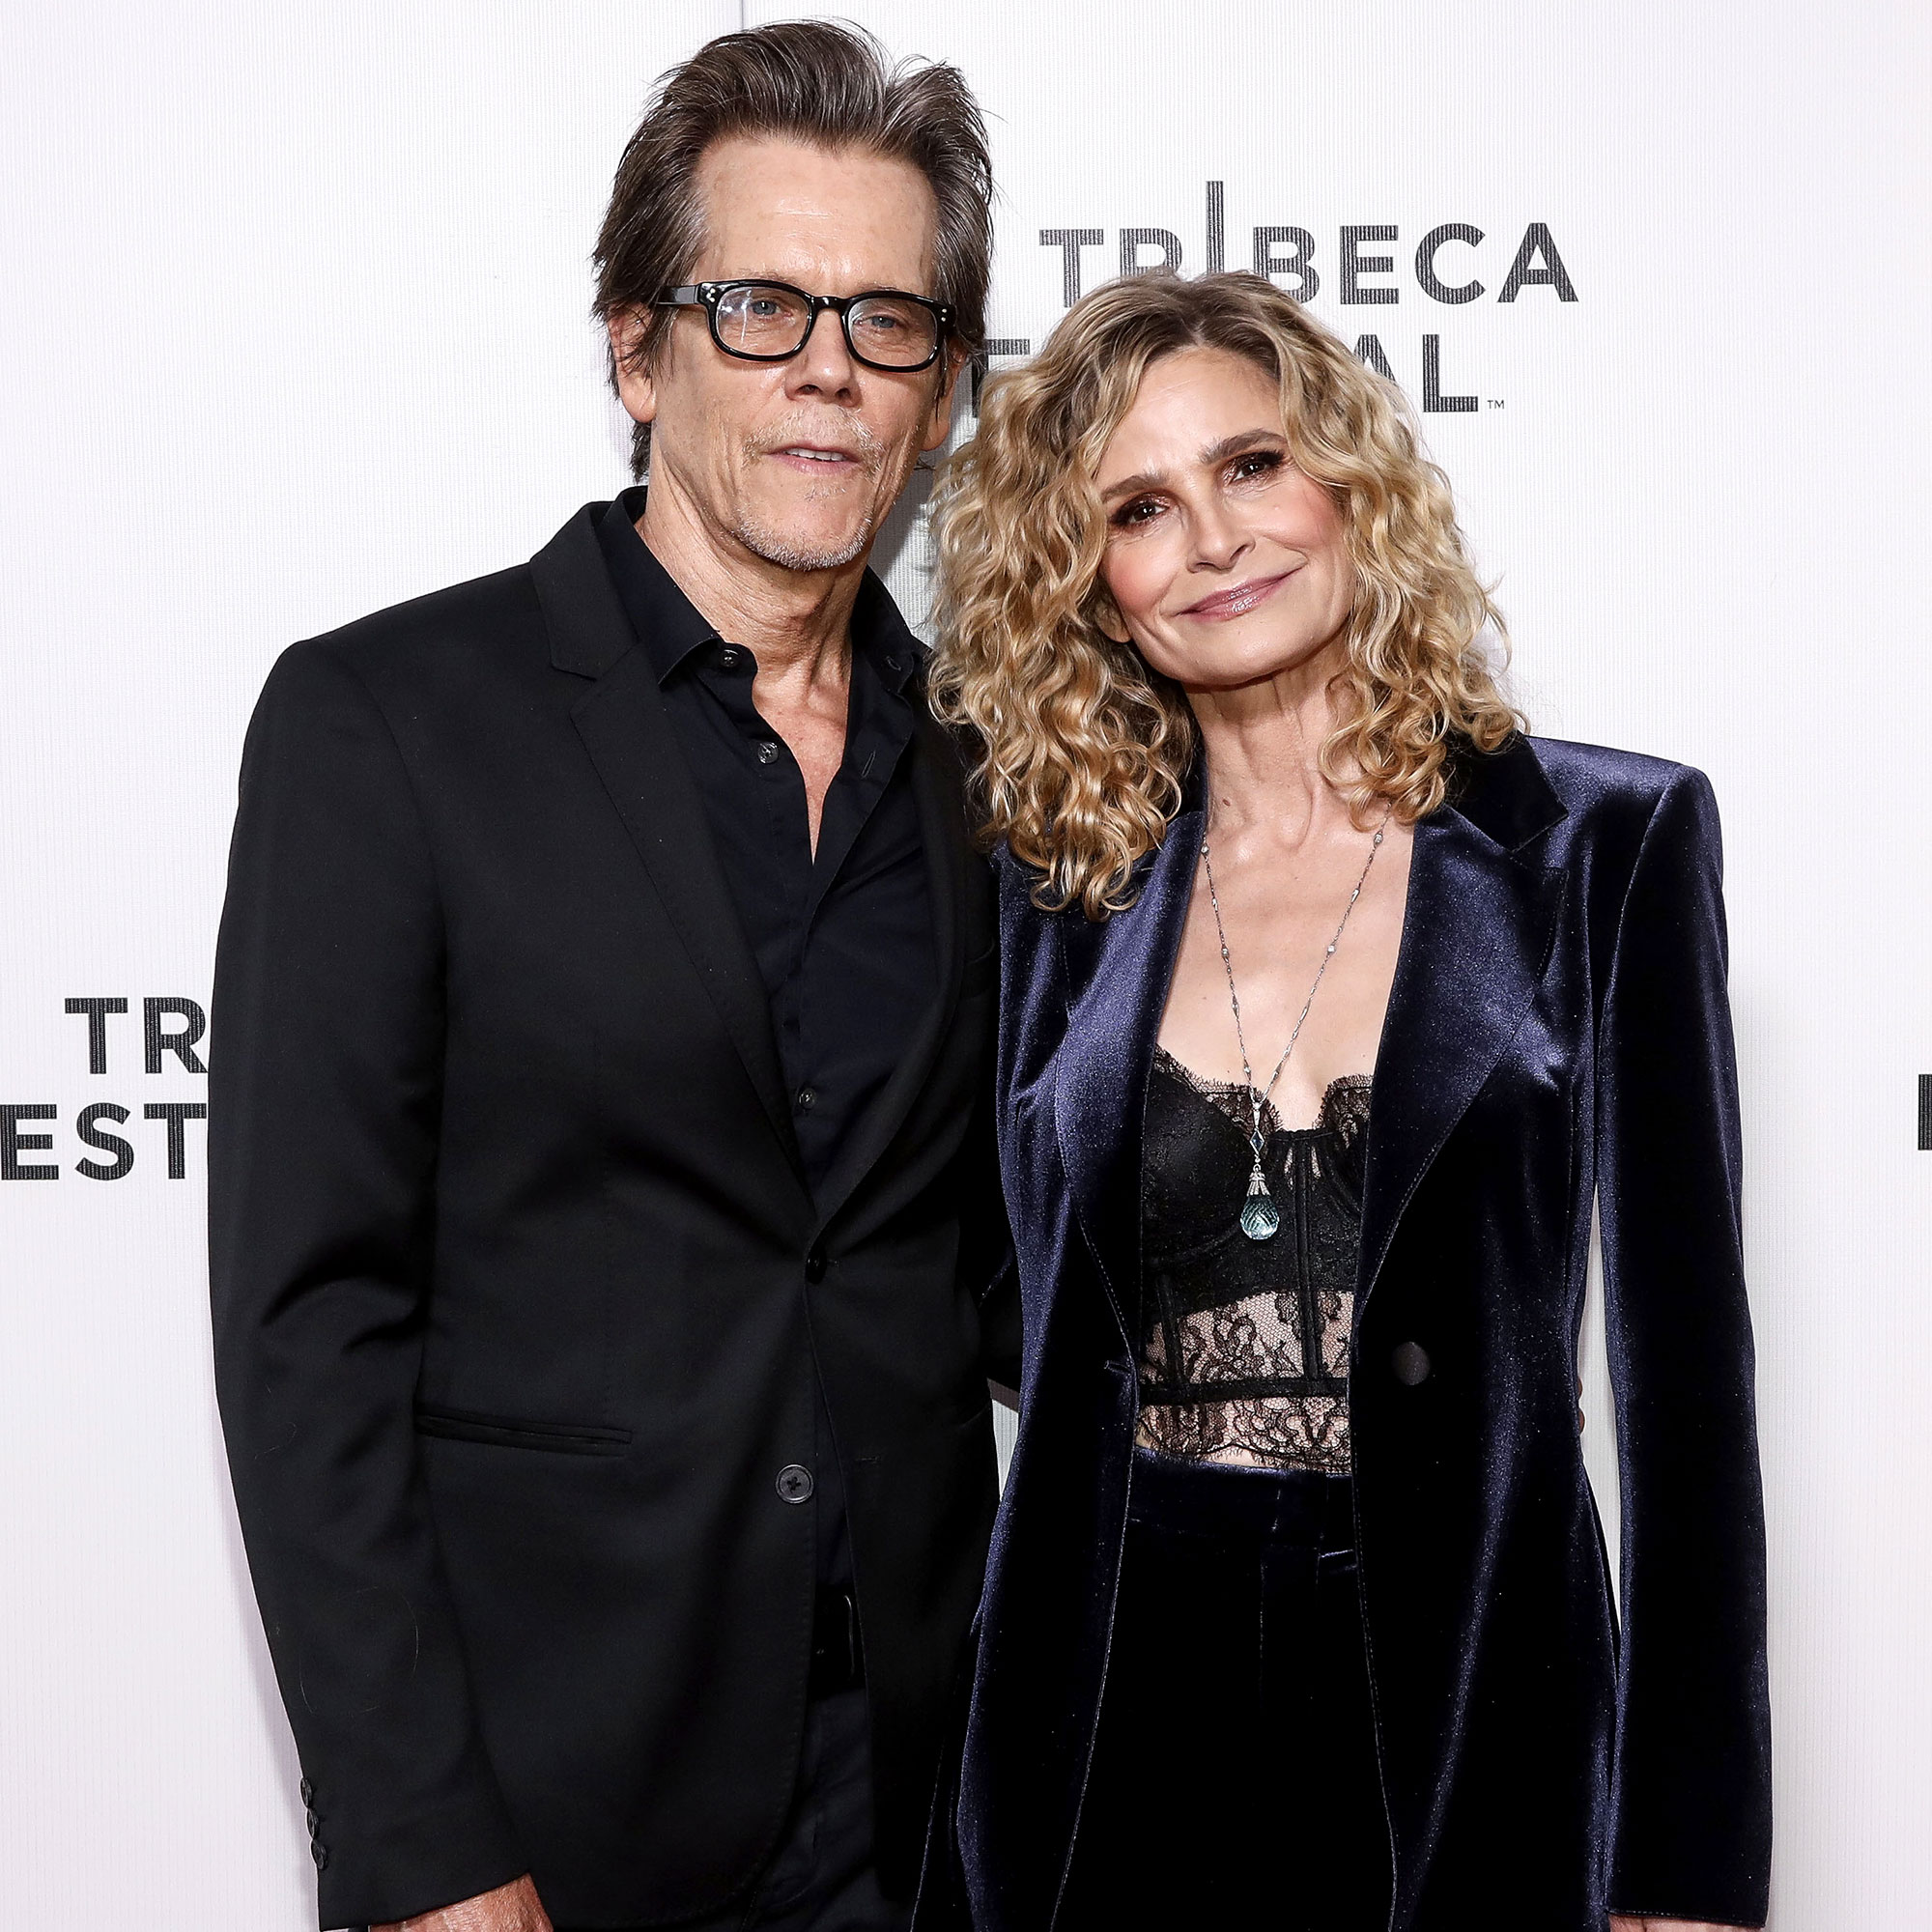 Kyra Sedgwick spices up a trouser suit with sheer lace bodysuit as